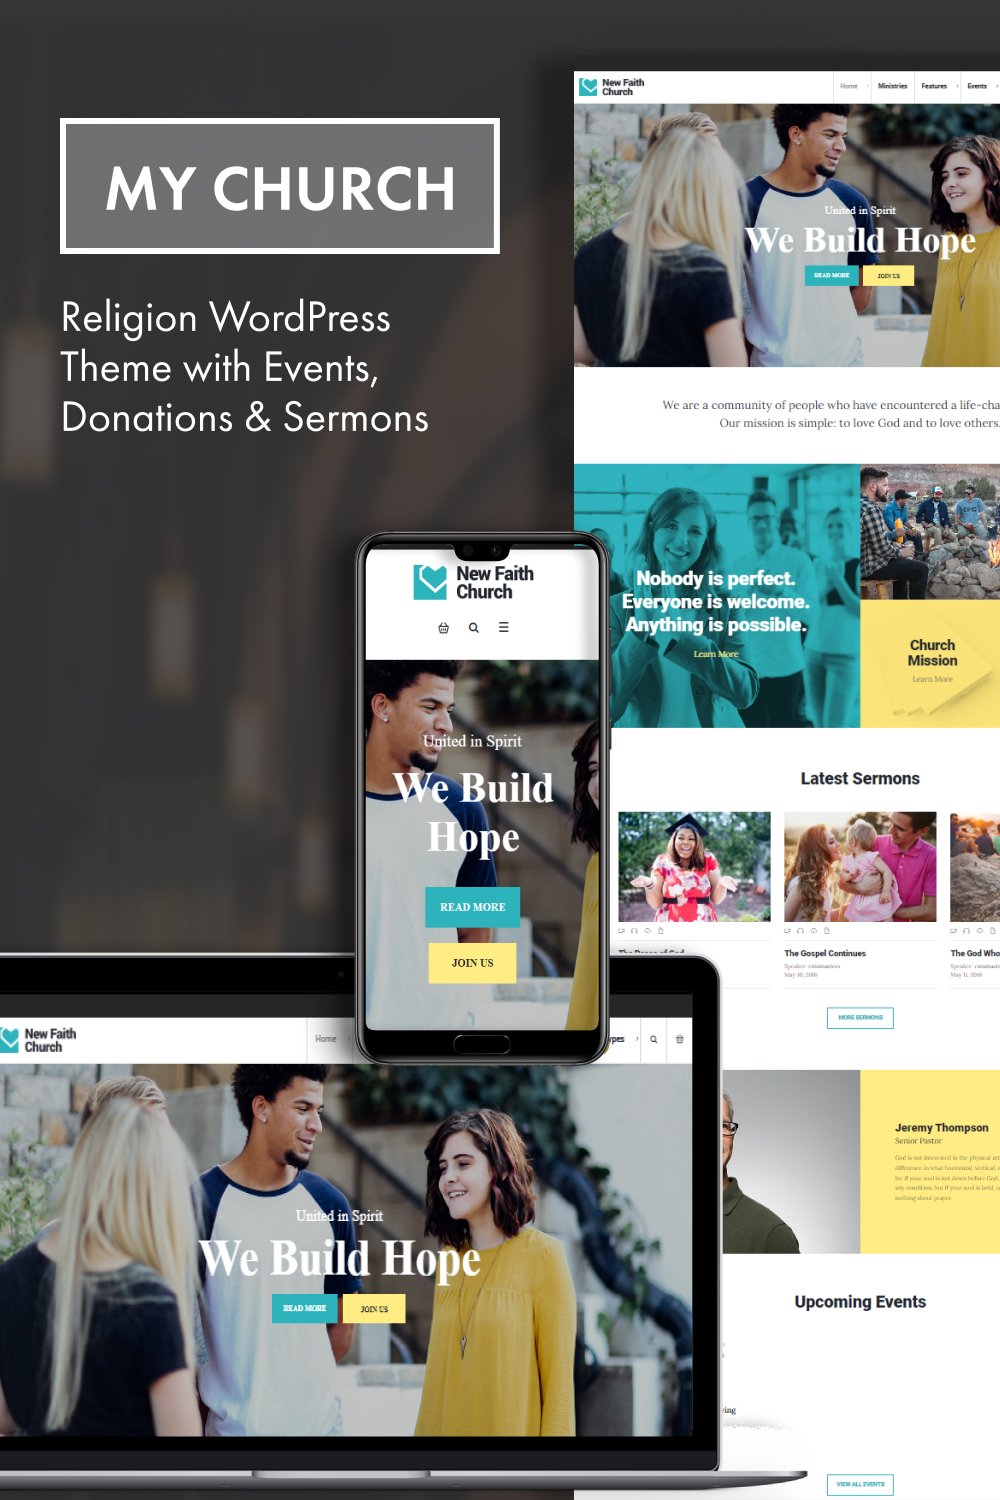 Pinterest of my church religion wordpress theme with events donations sermons.